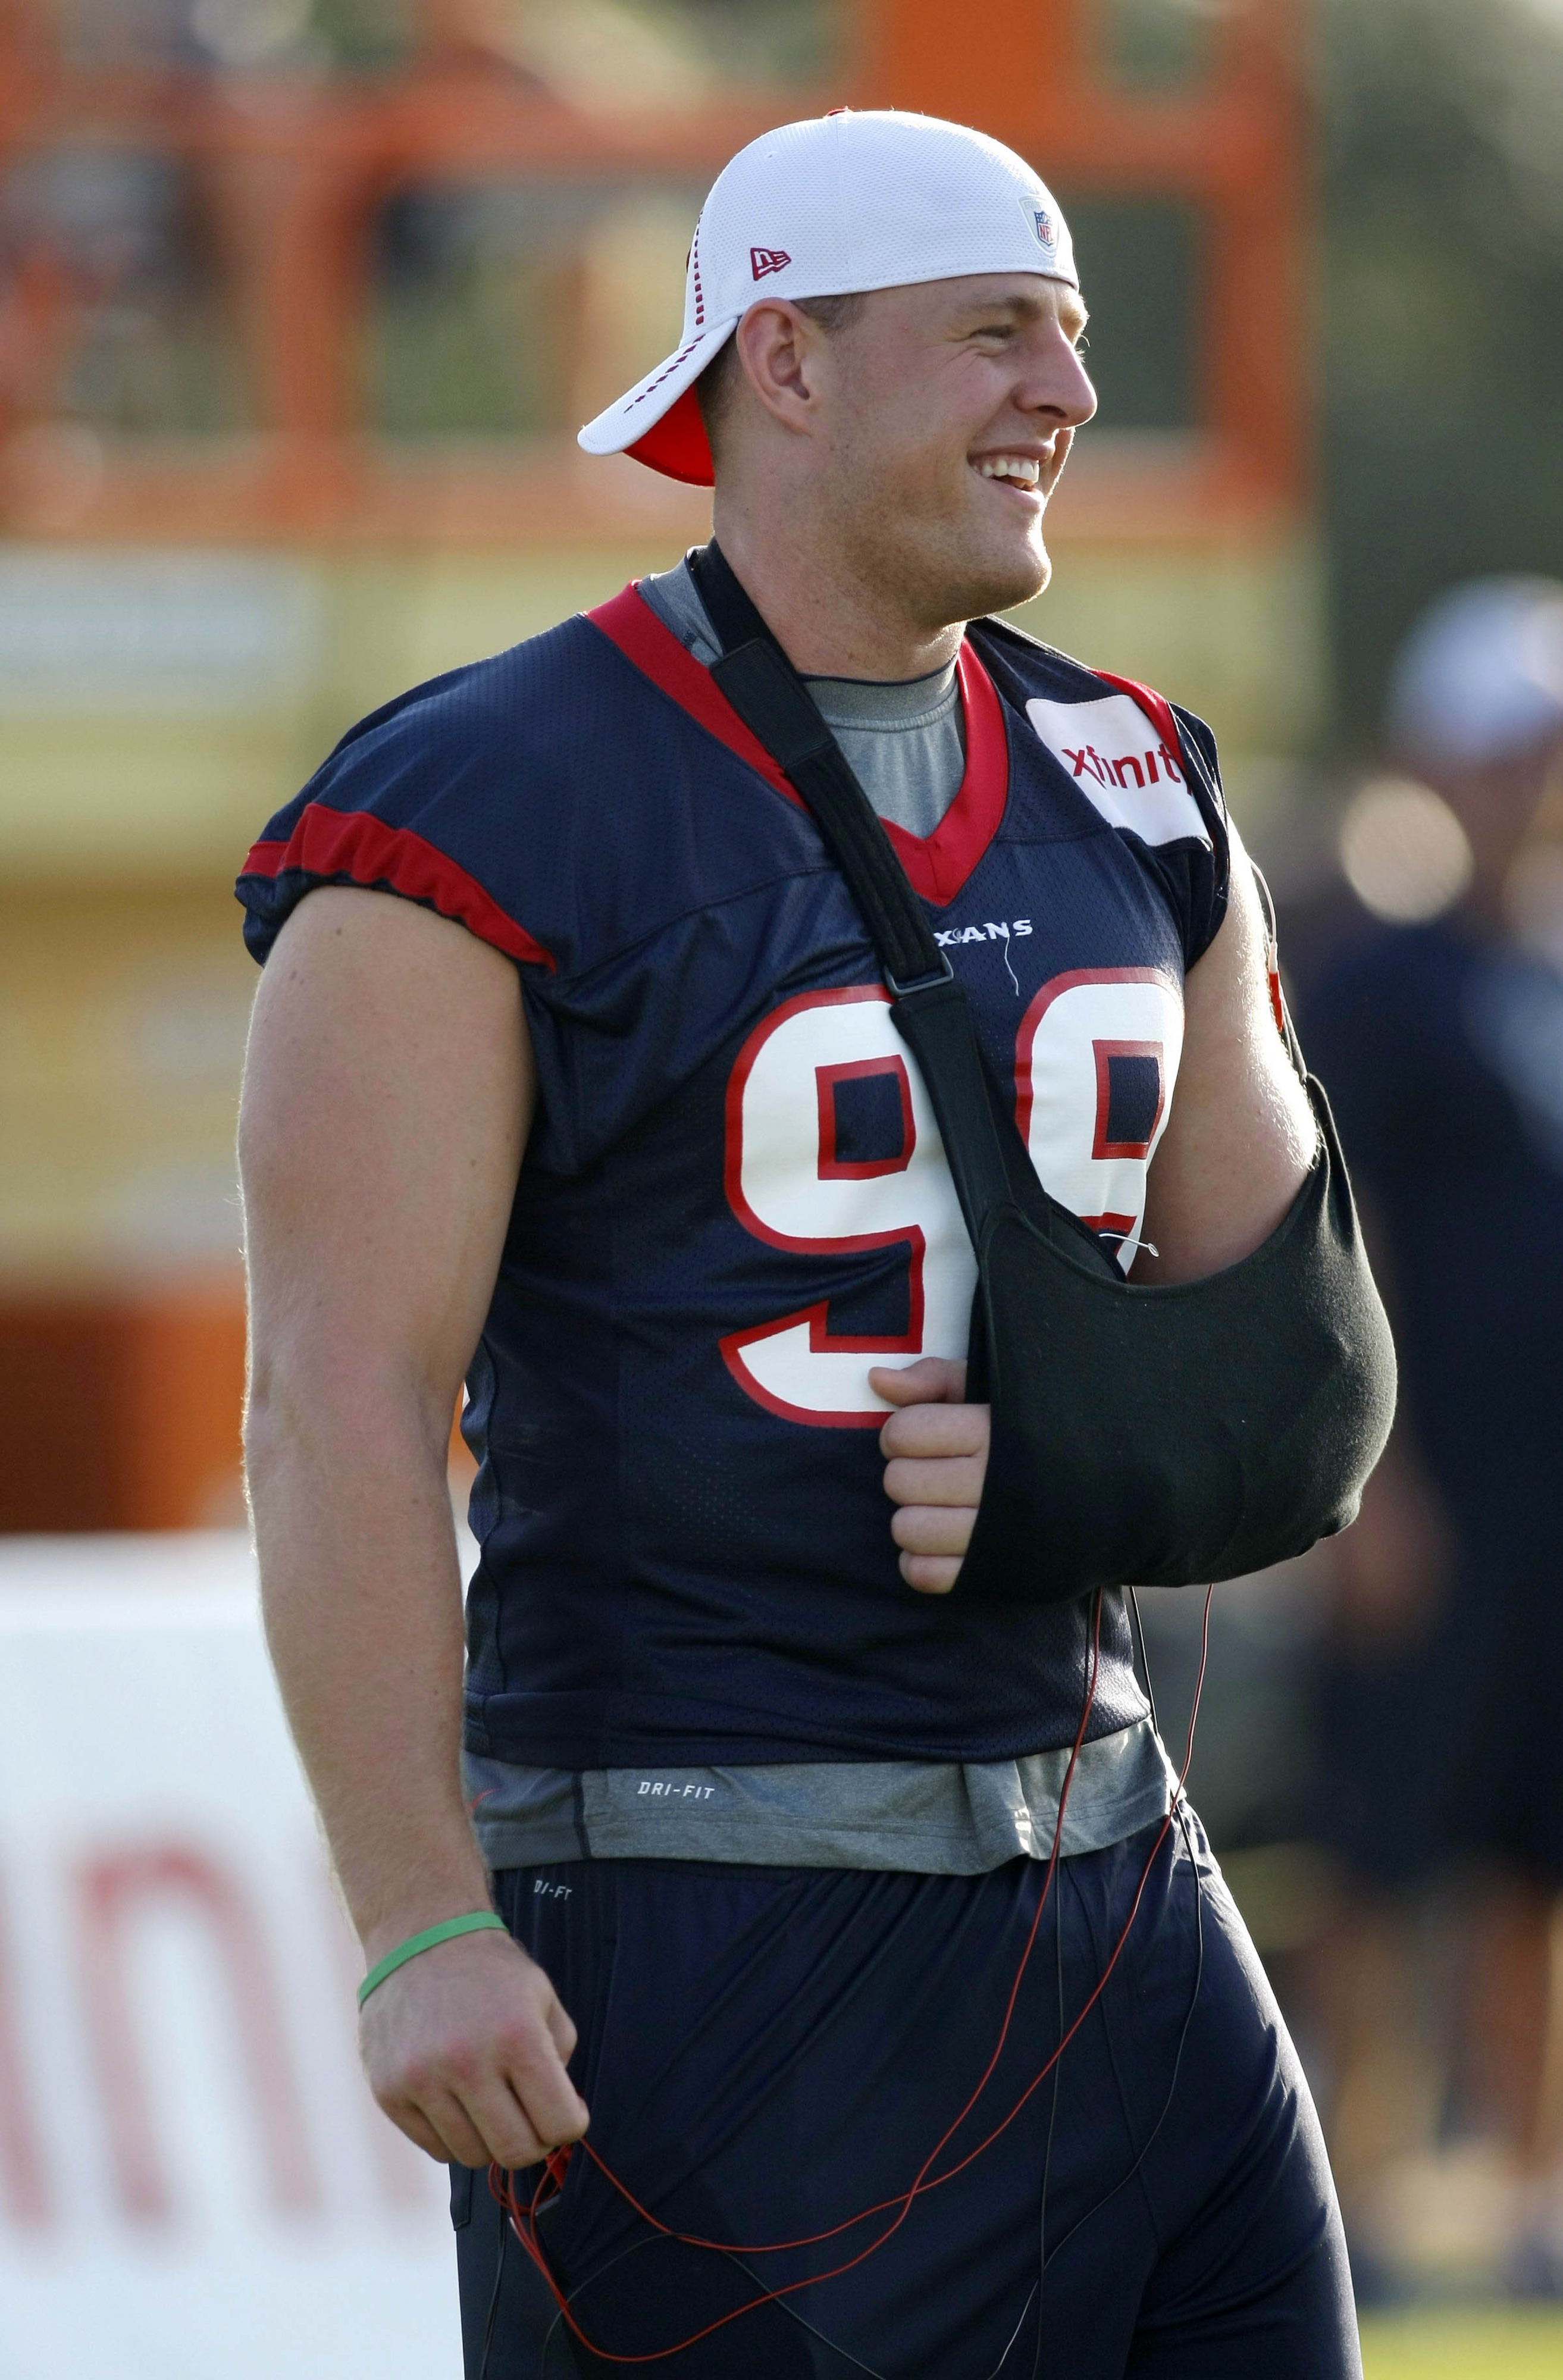 If J.J. Watt can laugh about it, so can I.  After 11 beers, of course.